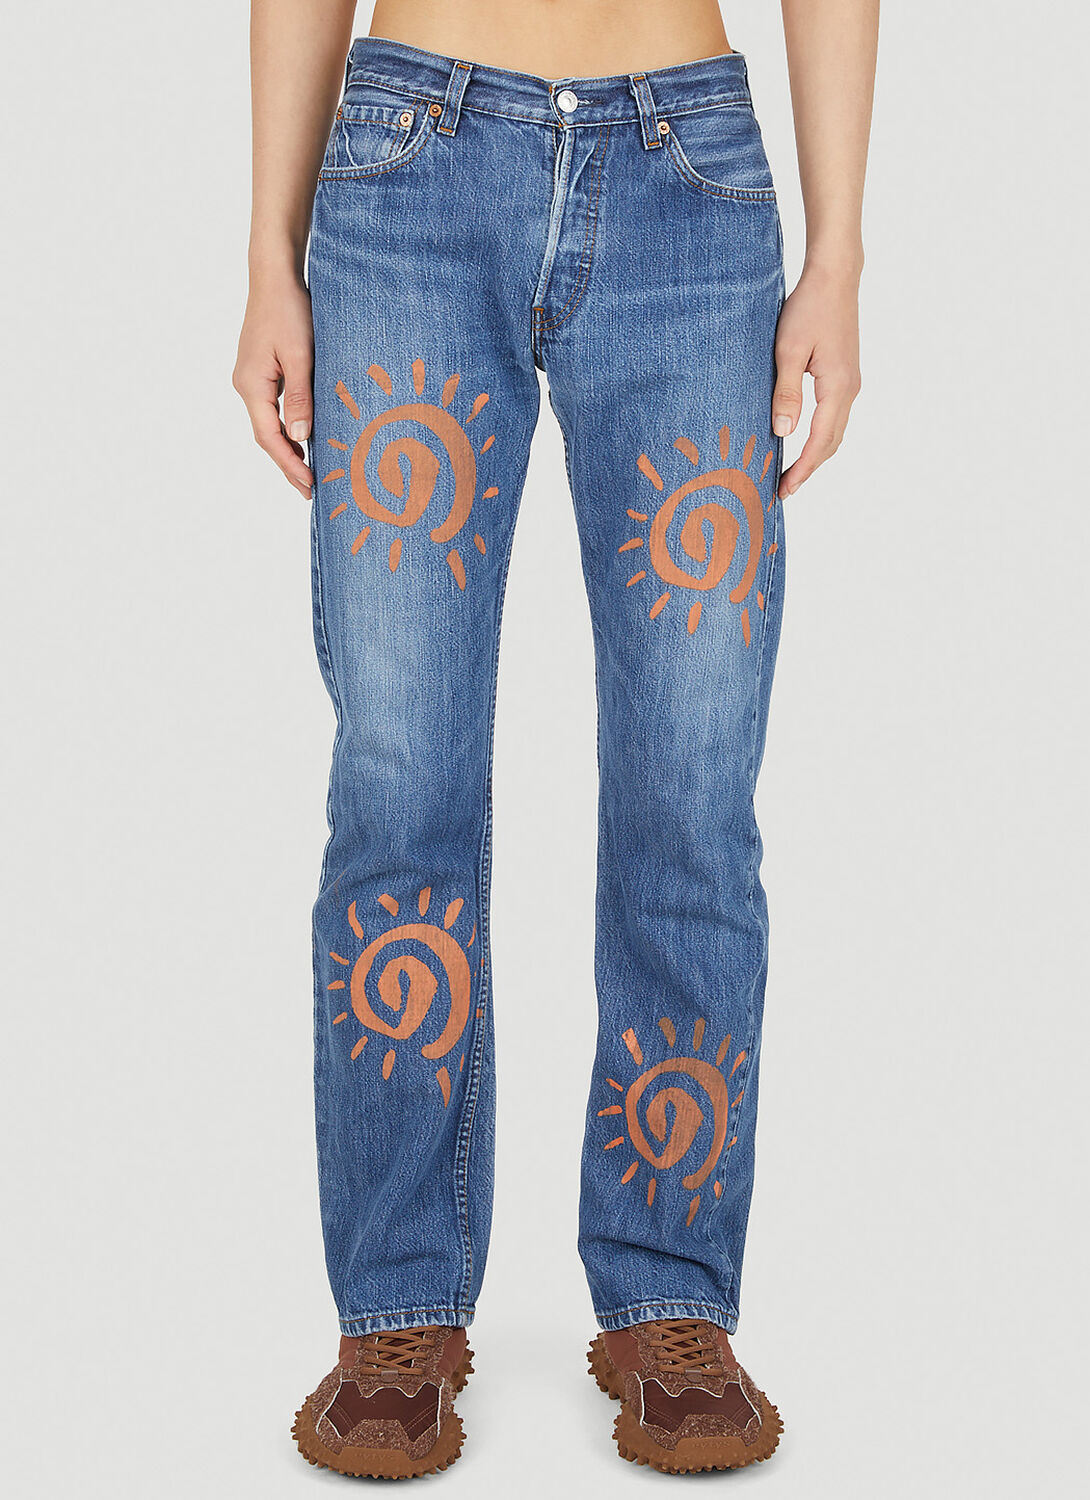 Perks And Mini Energy Sun Second Life Jeans